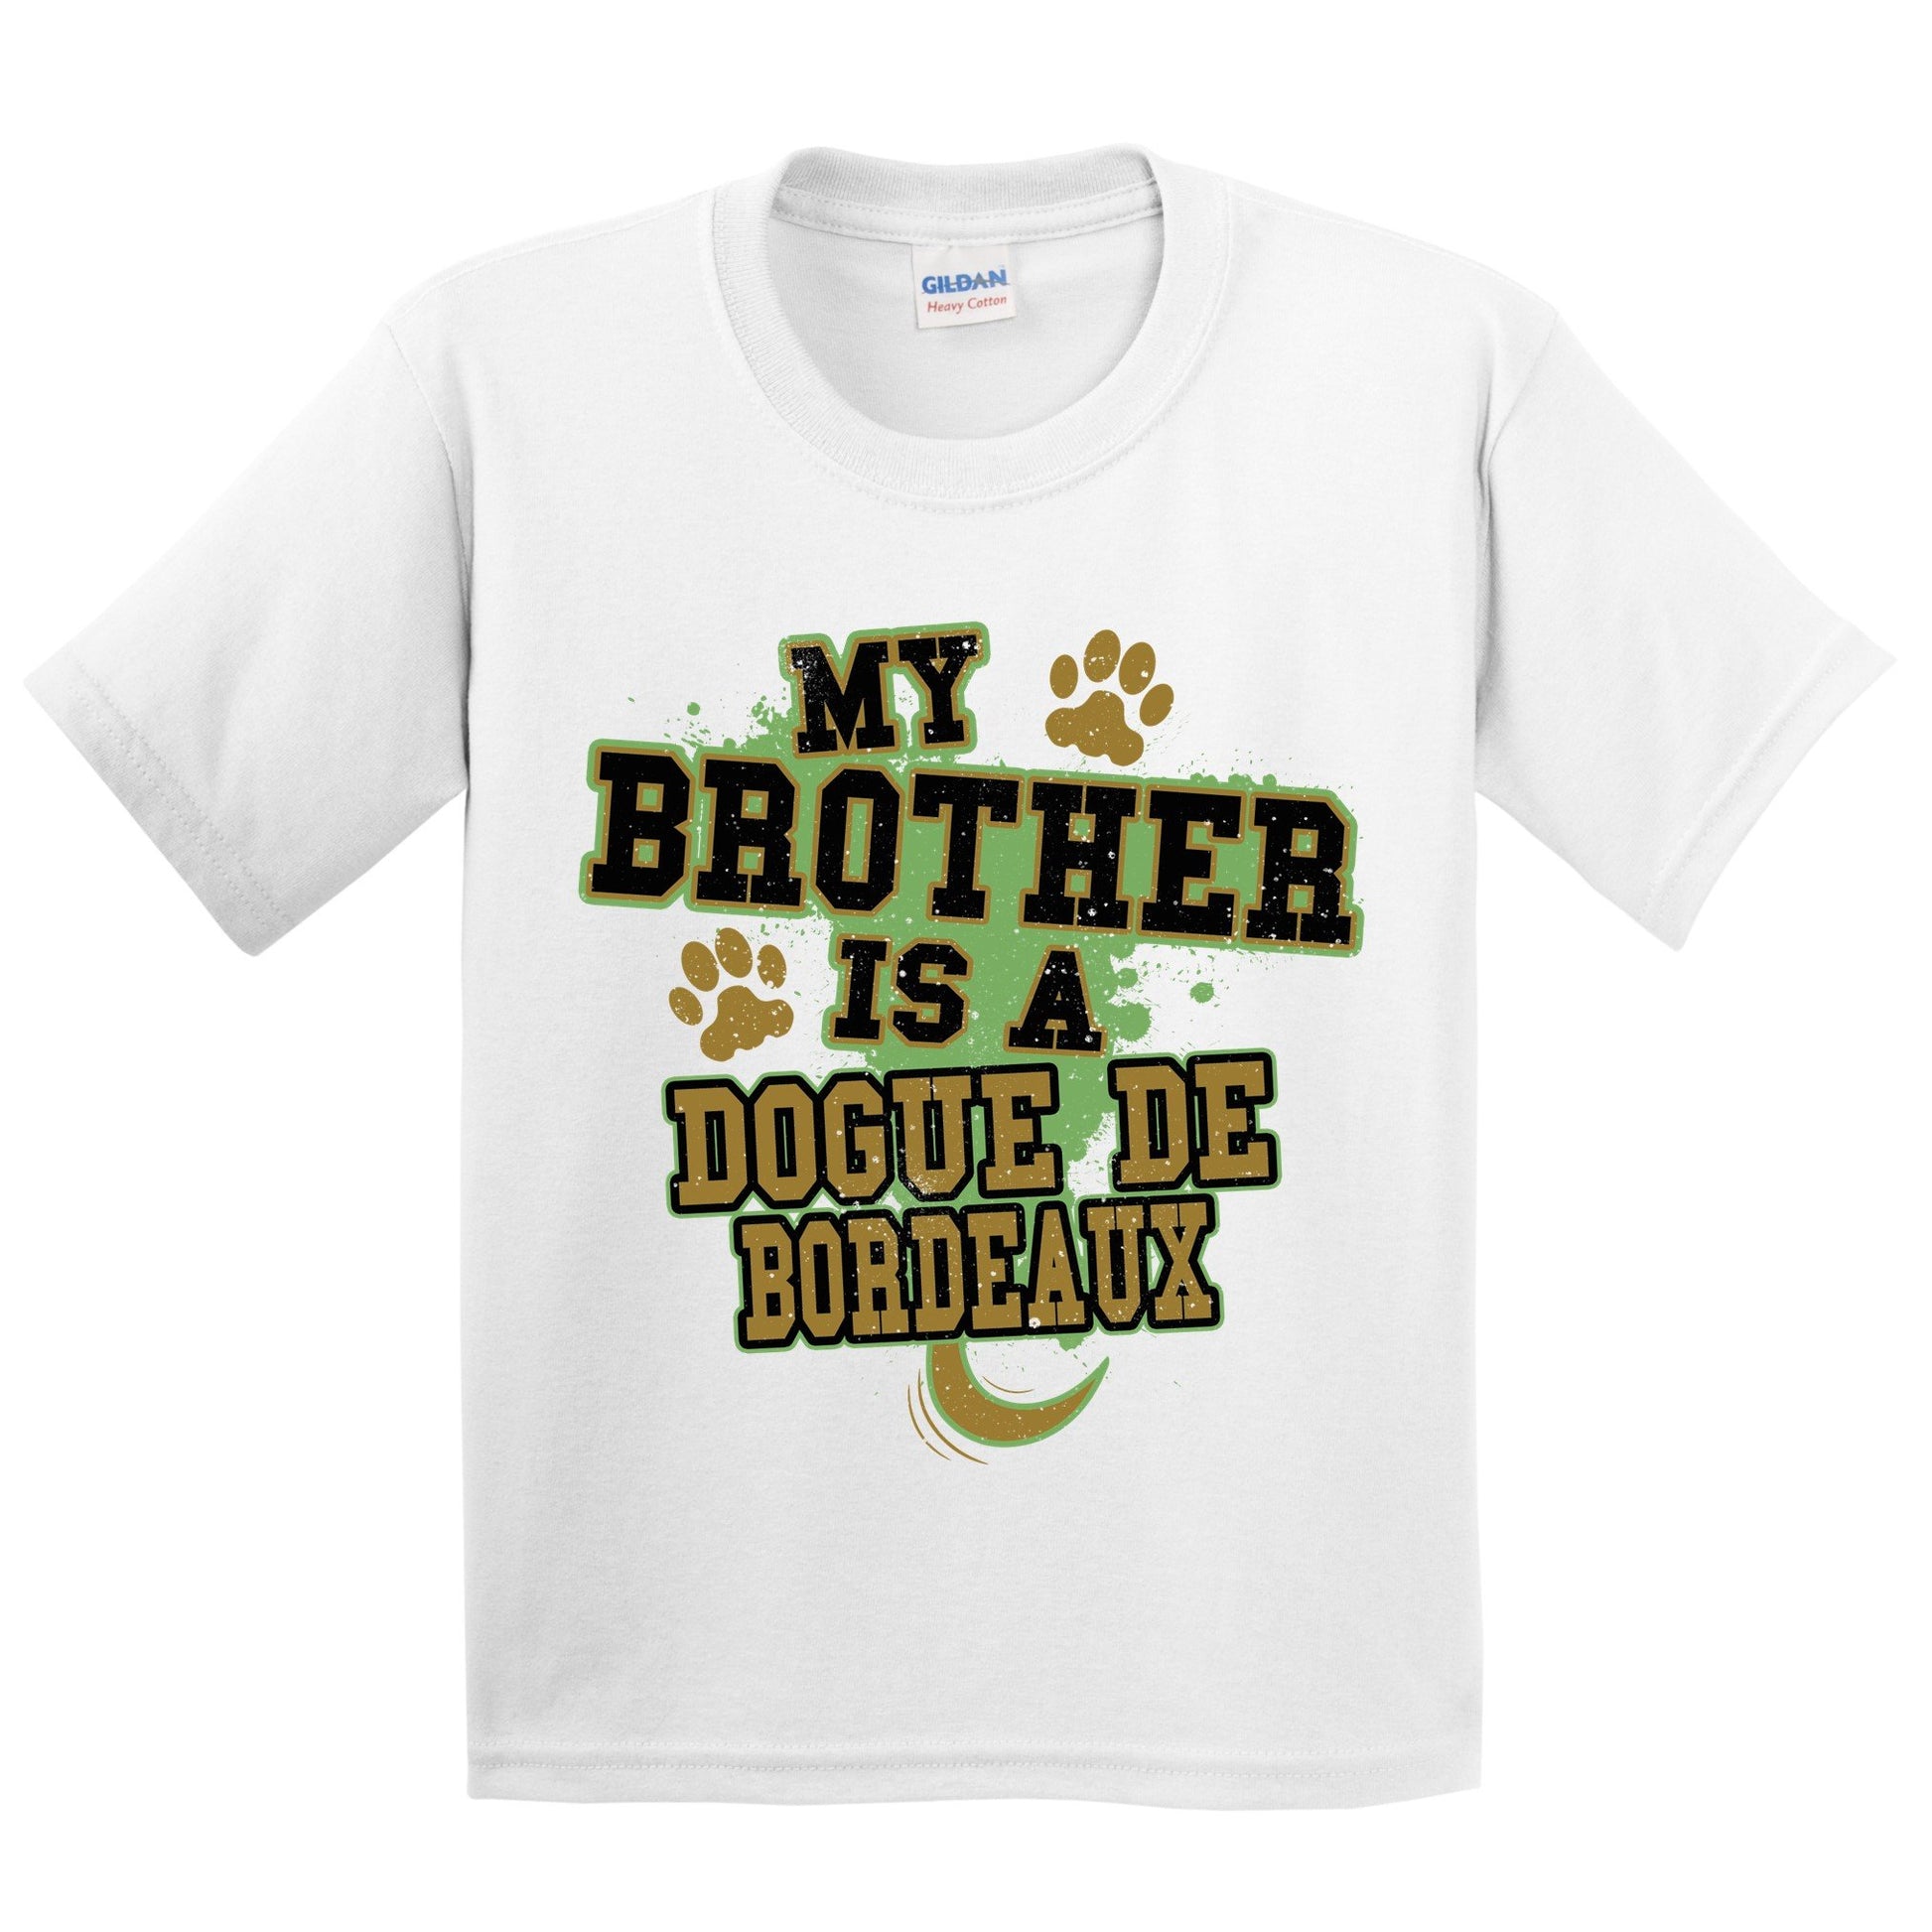 My Brother Is A Dogue de Bordeaux Funny Dog Kids Youth T-Shirt